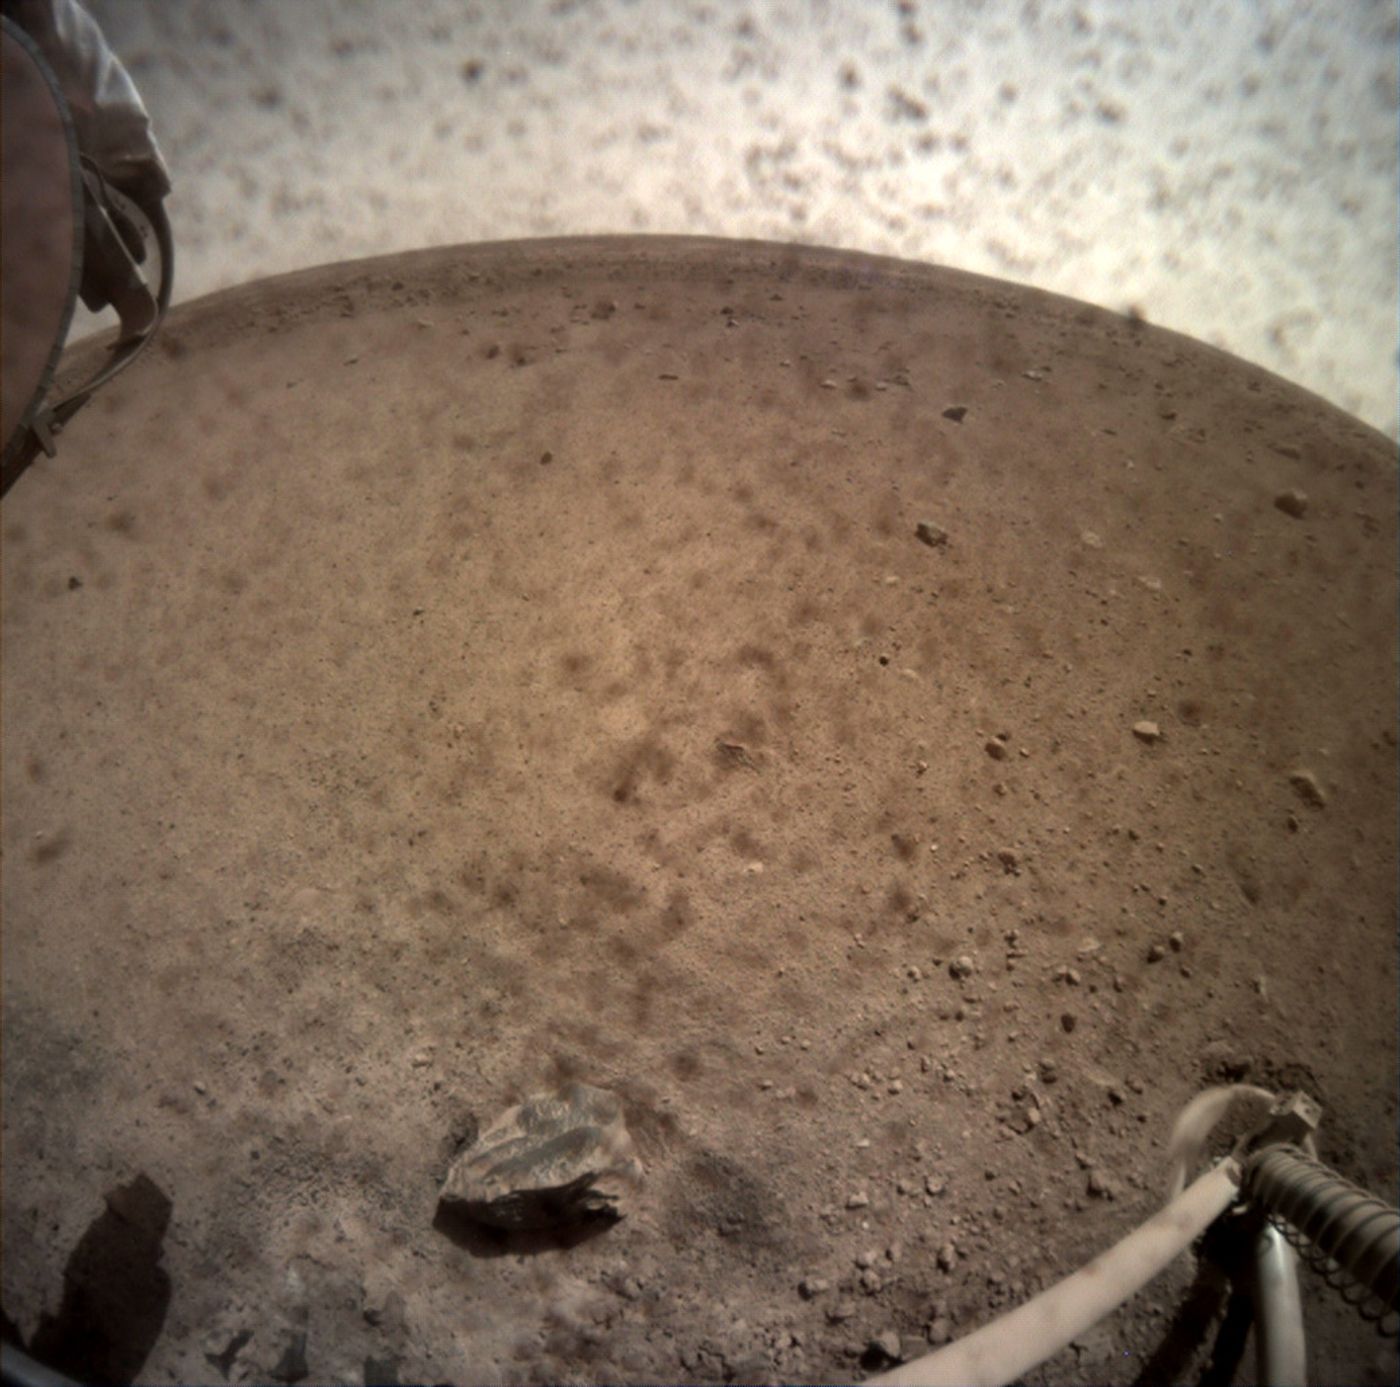 A dusty photograph showing off InSight's surroundings. One of the lander's feet is visible in the frame.